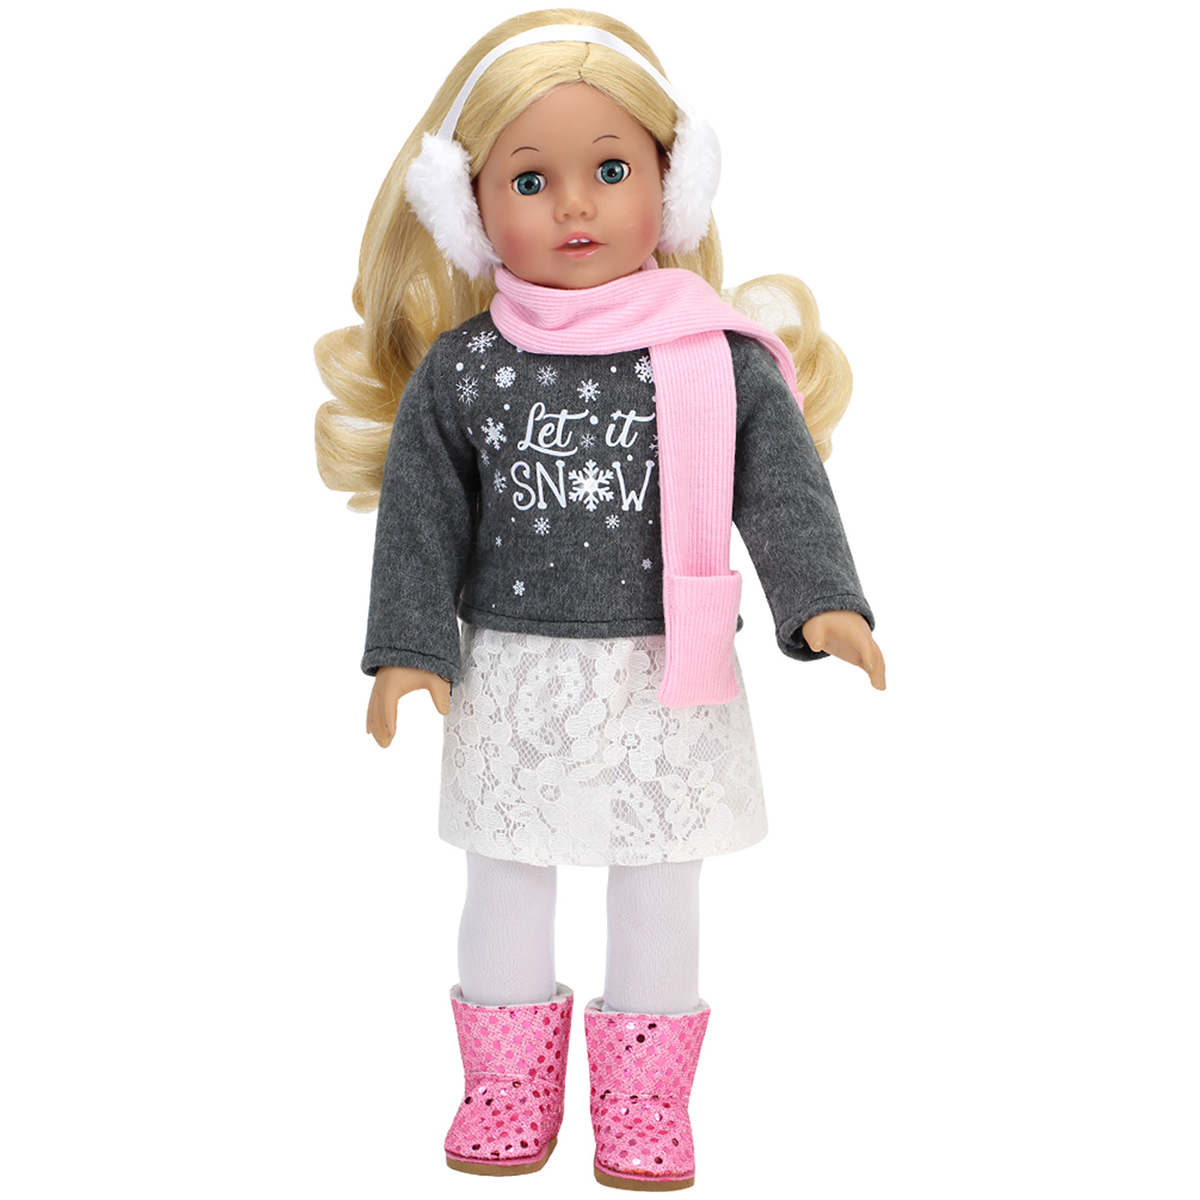 Sophia's(R) 6pc. Let It Snow Sweater And Skirt Set